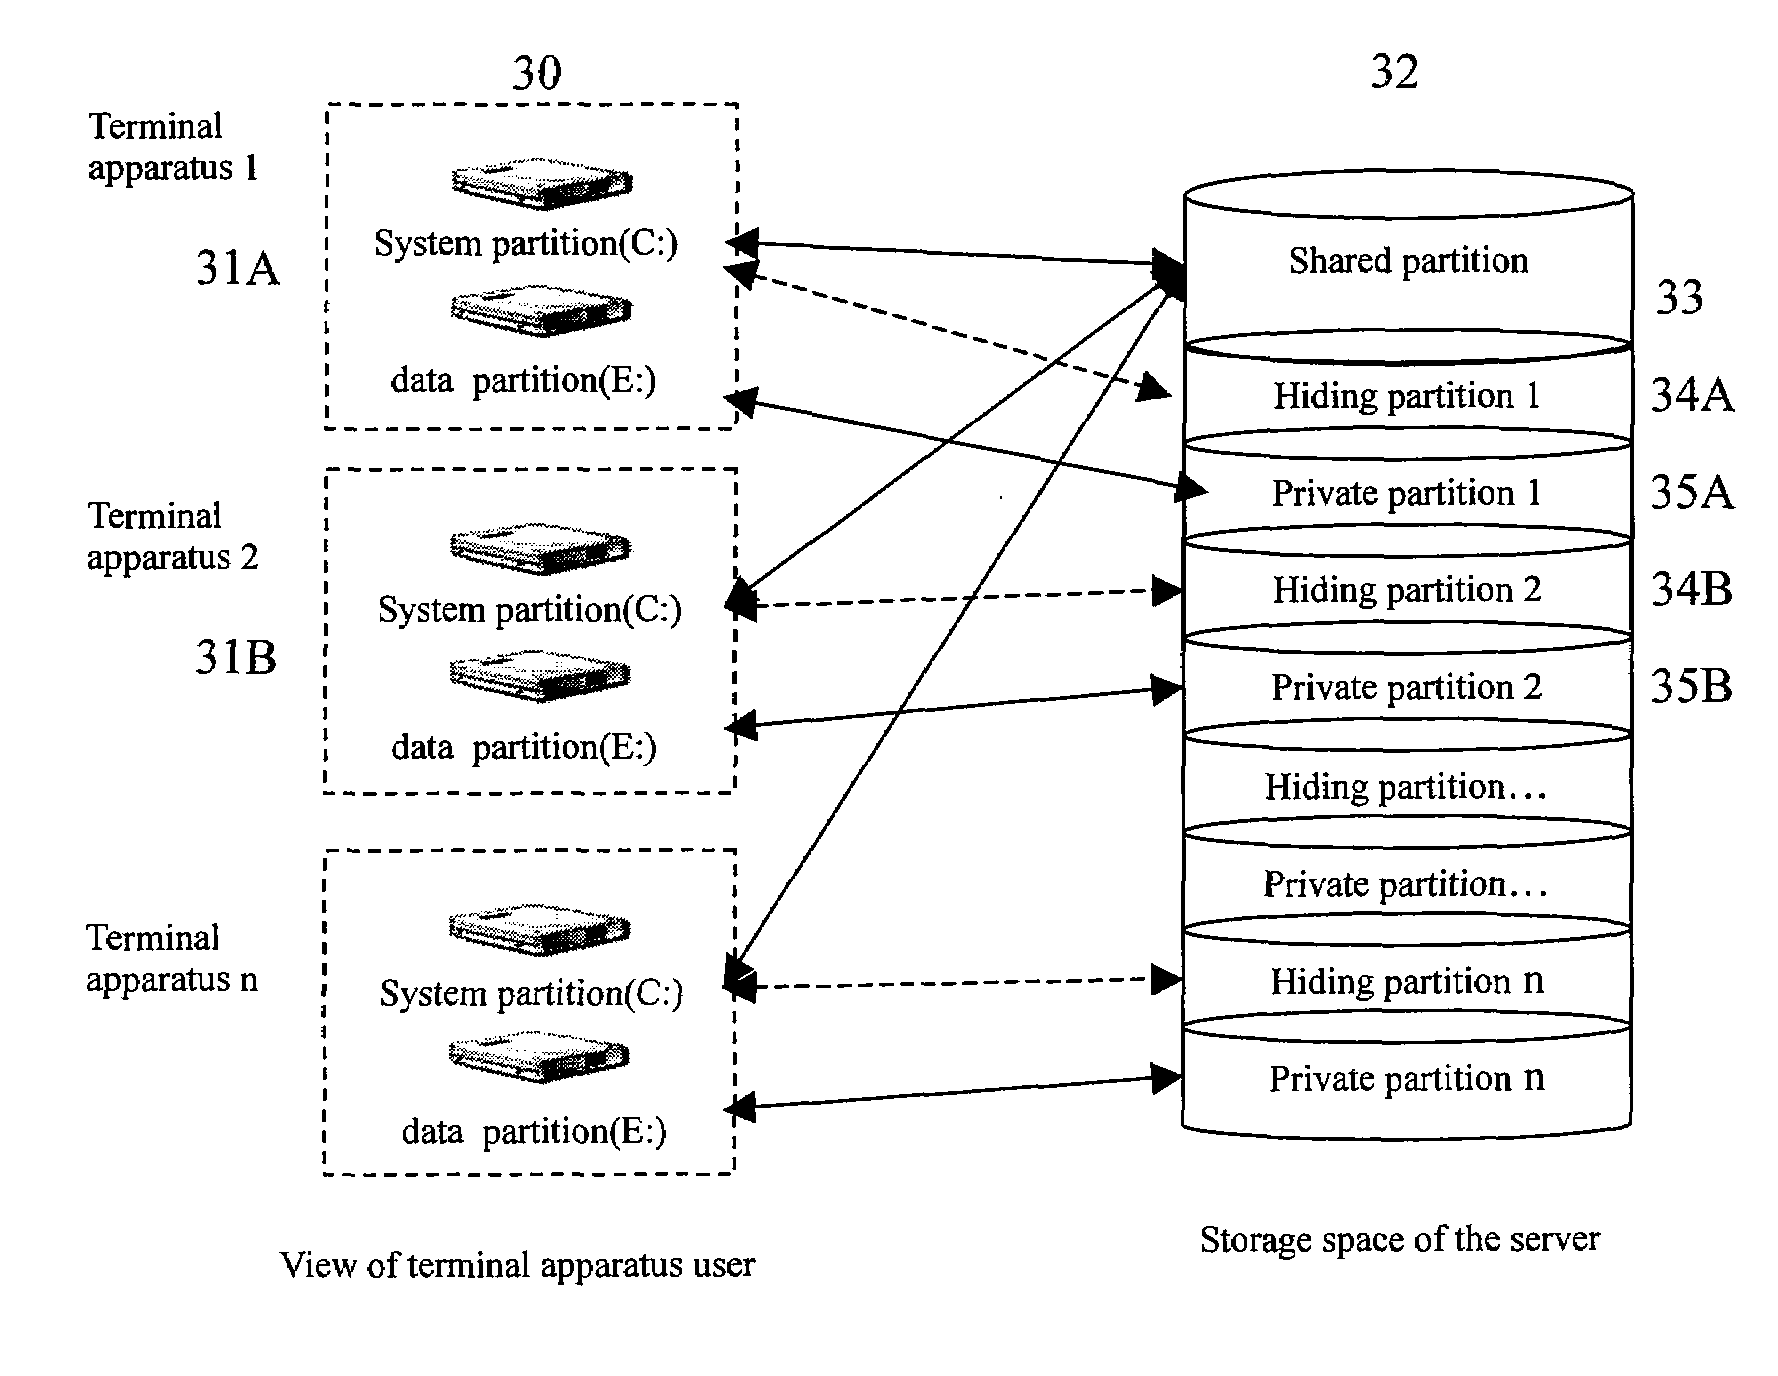 Method for transferring data between terminal apparatuses in a transparent computation system